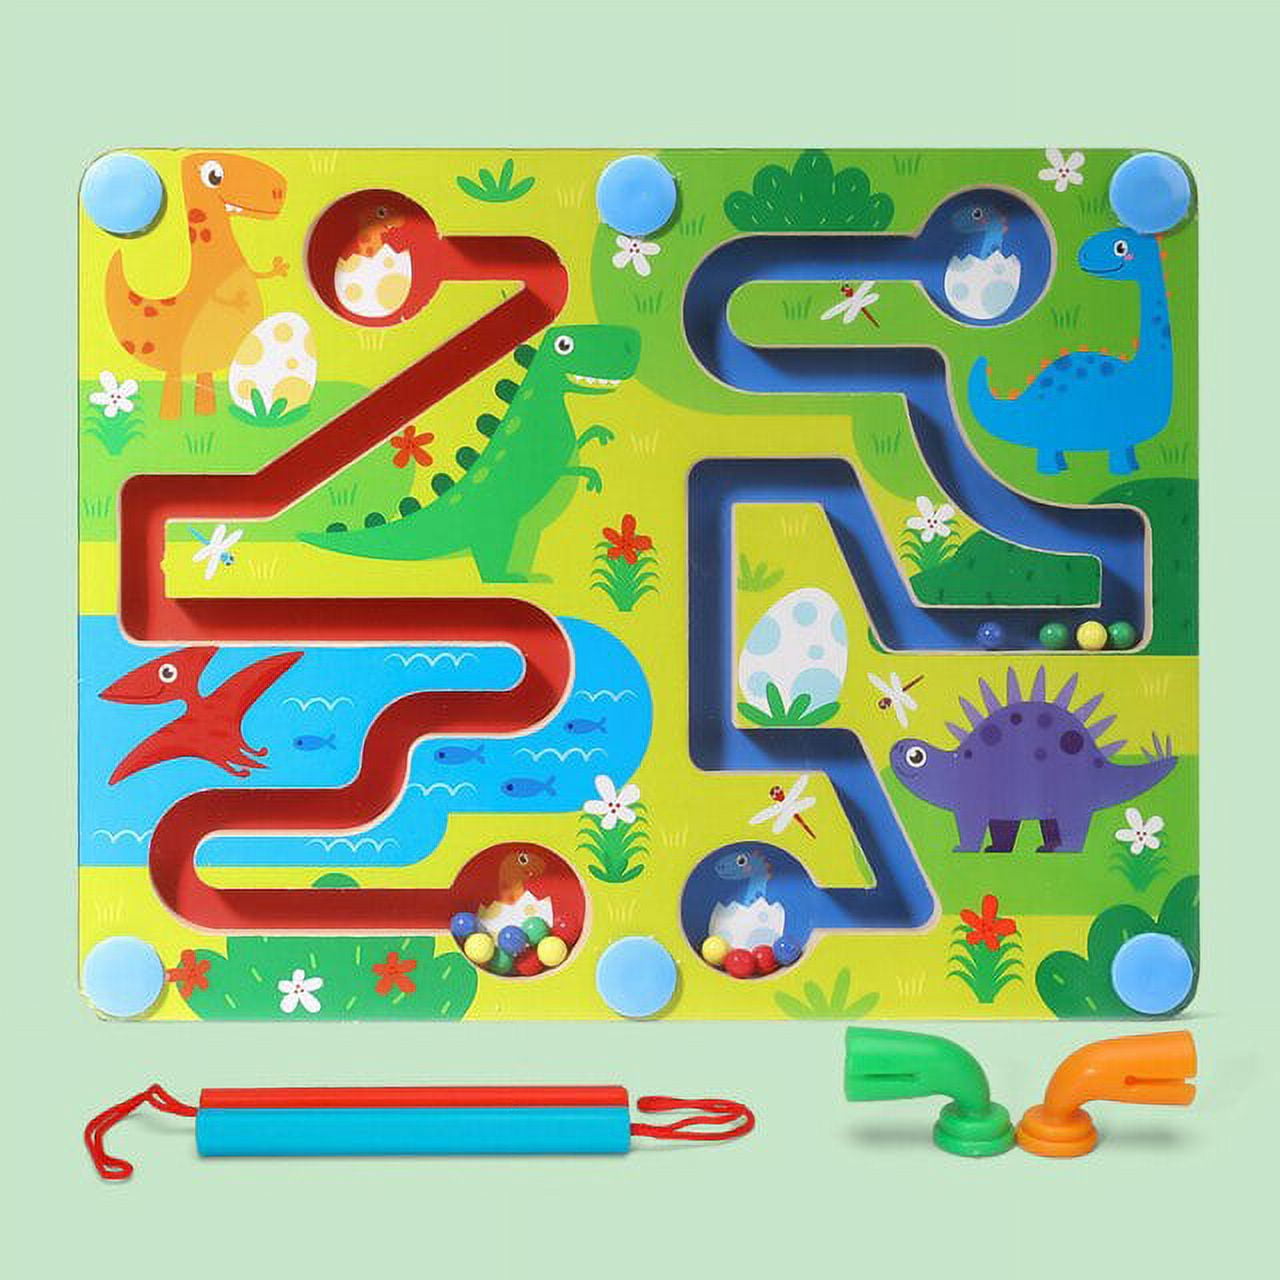 Source QS Children Early Education Puzzle Games For Kids on m